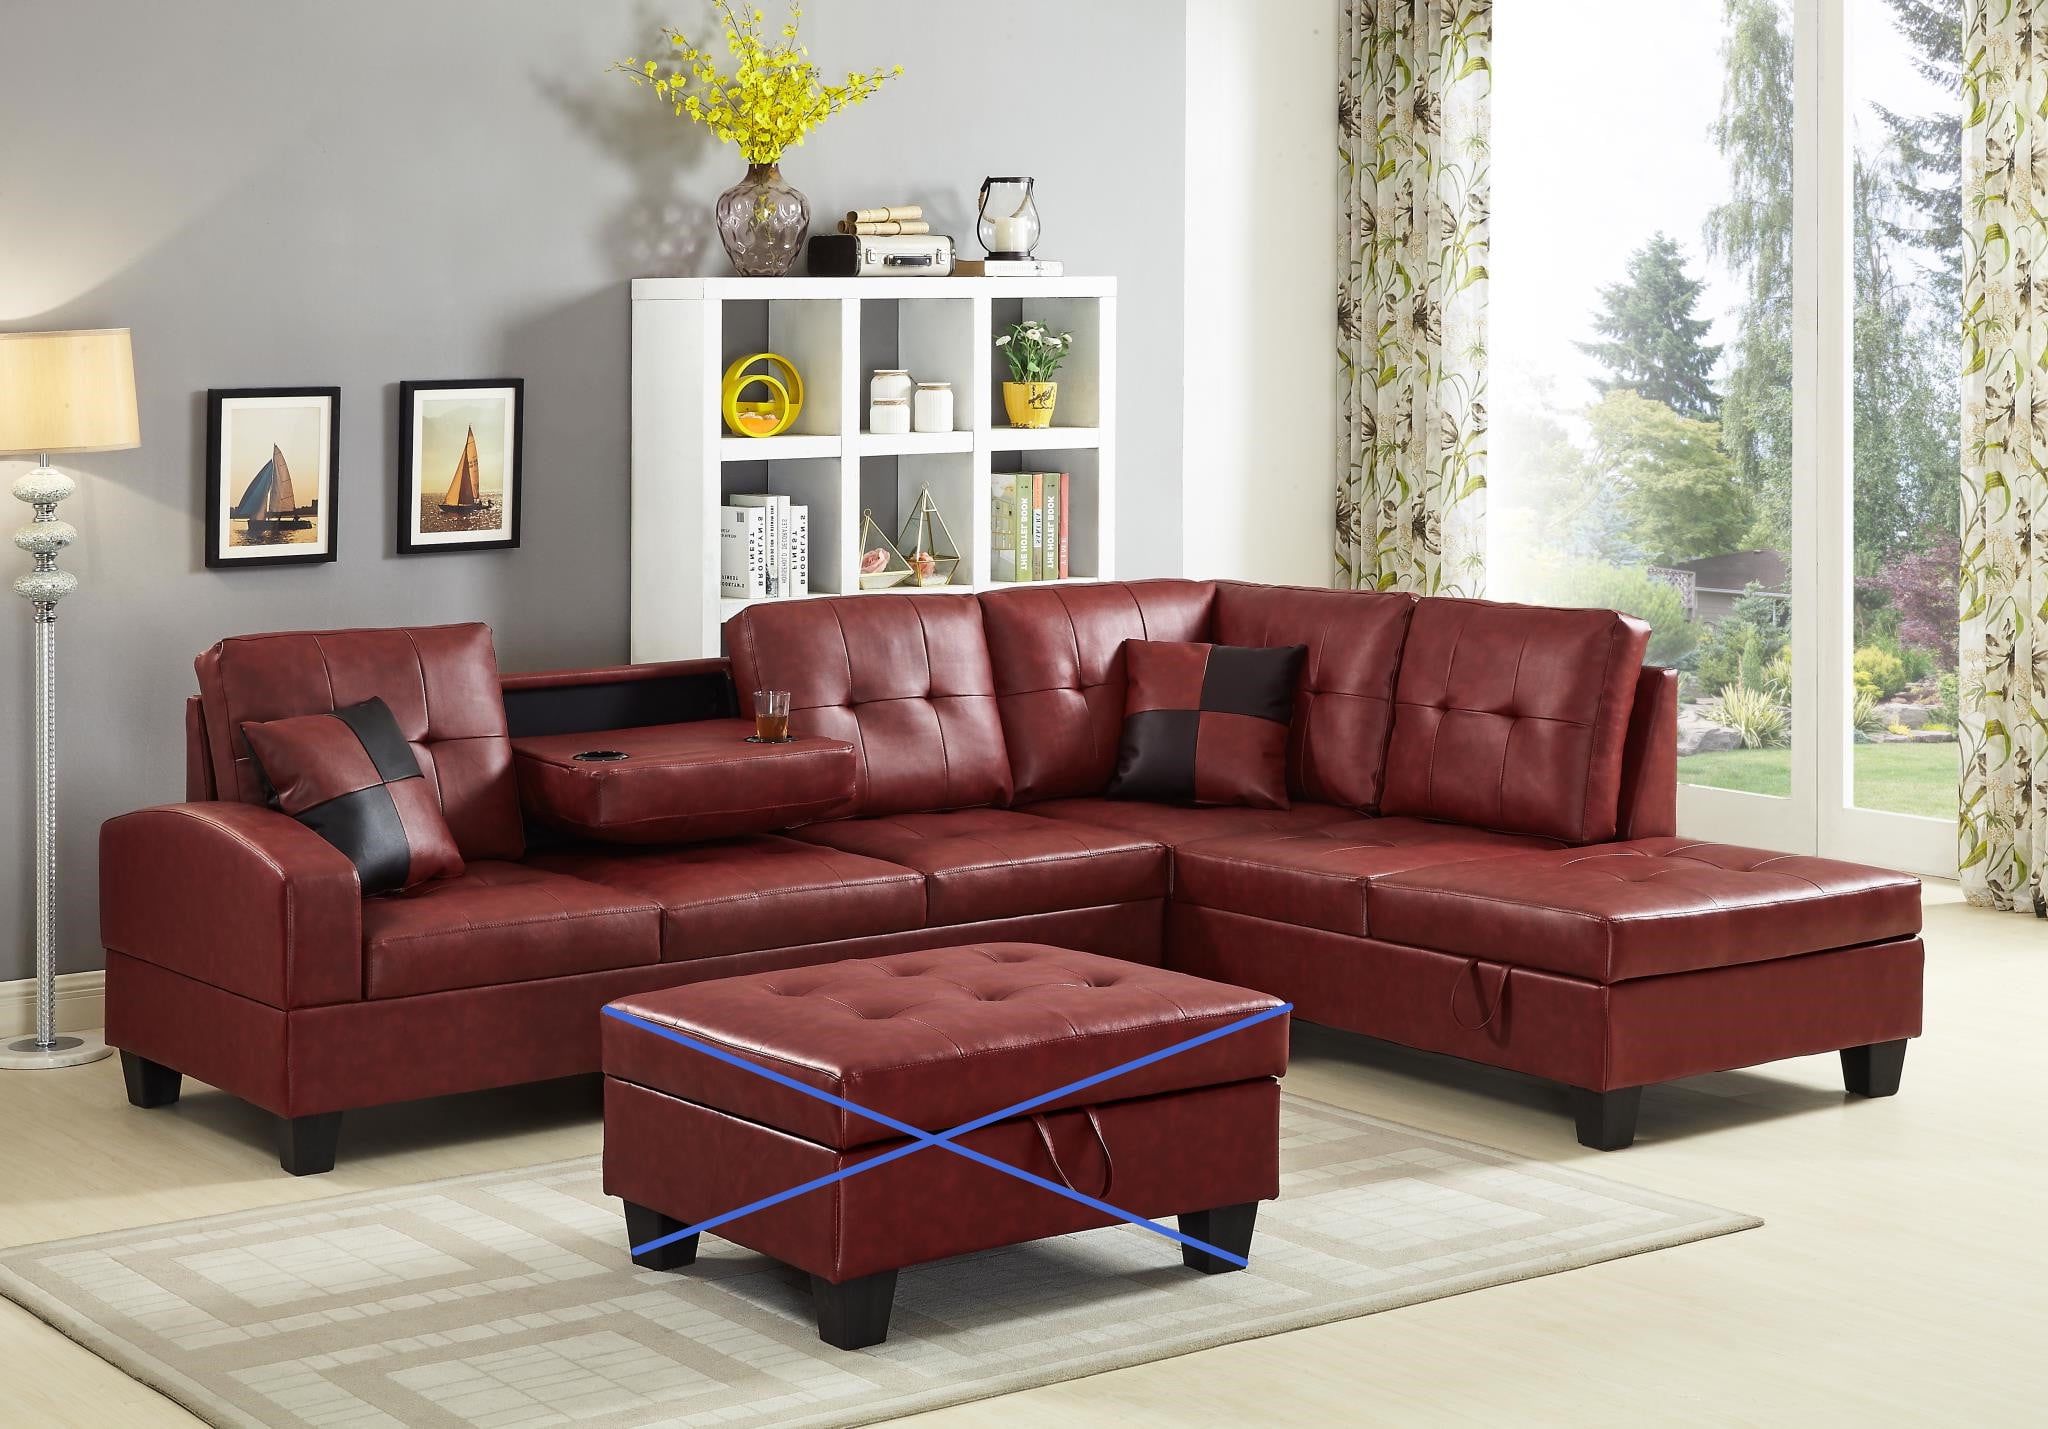 Gtu Furniture Pu Leather Living Room Irreversible Living Room Sectional Within Sofas For Living Rooms (View 13 of 20)